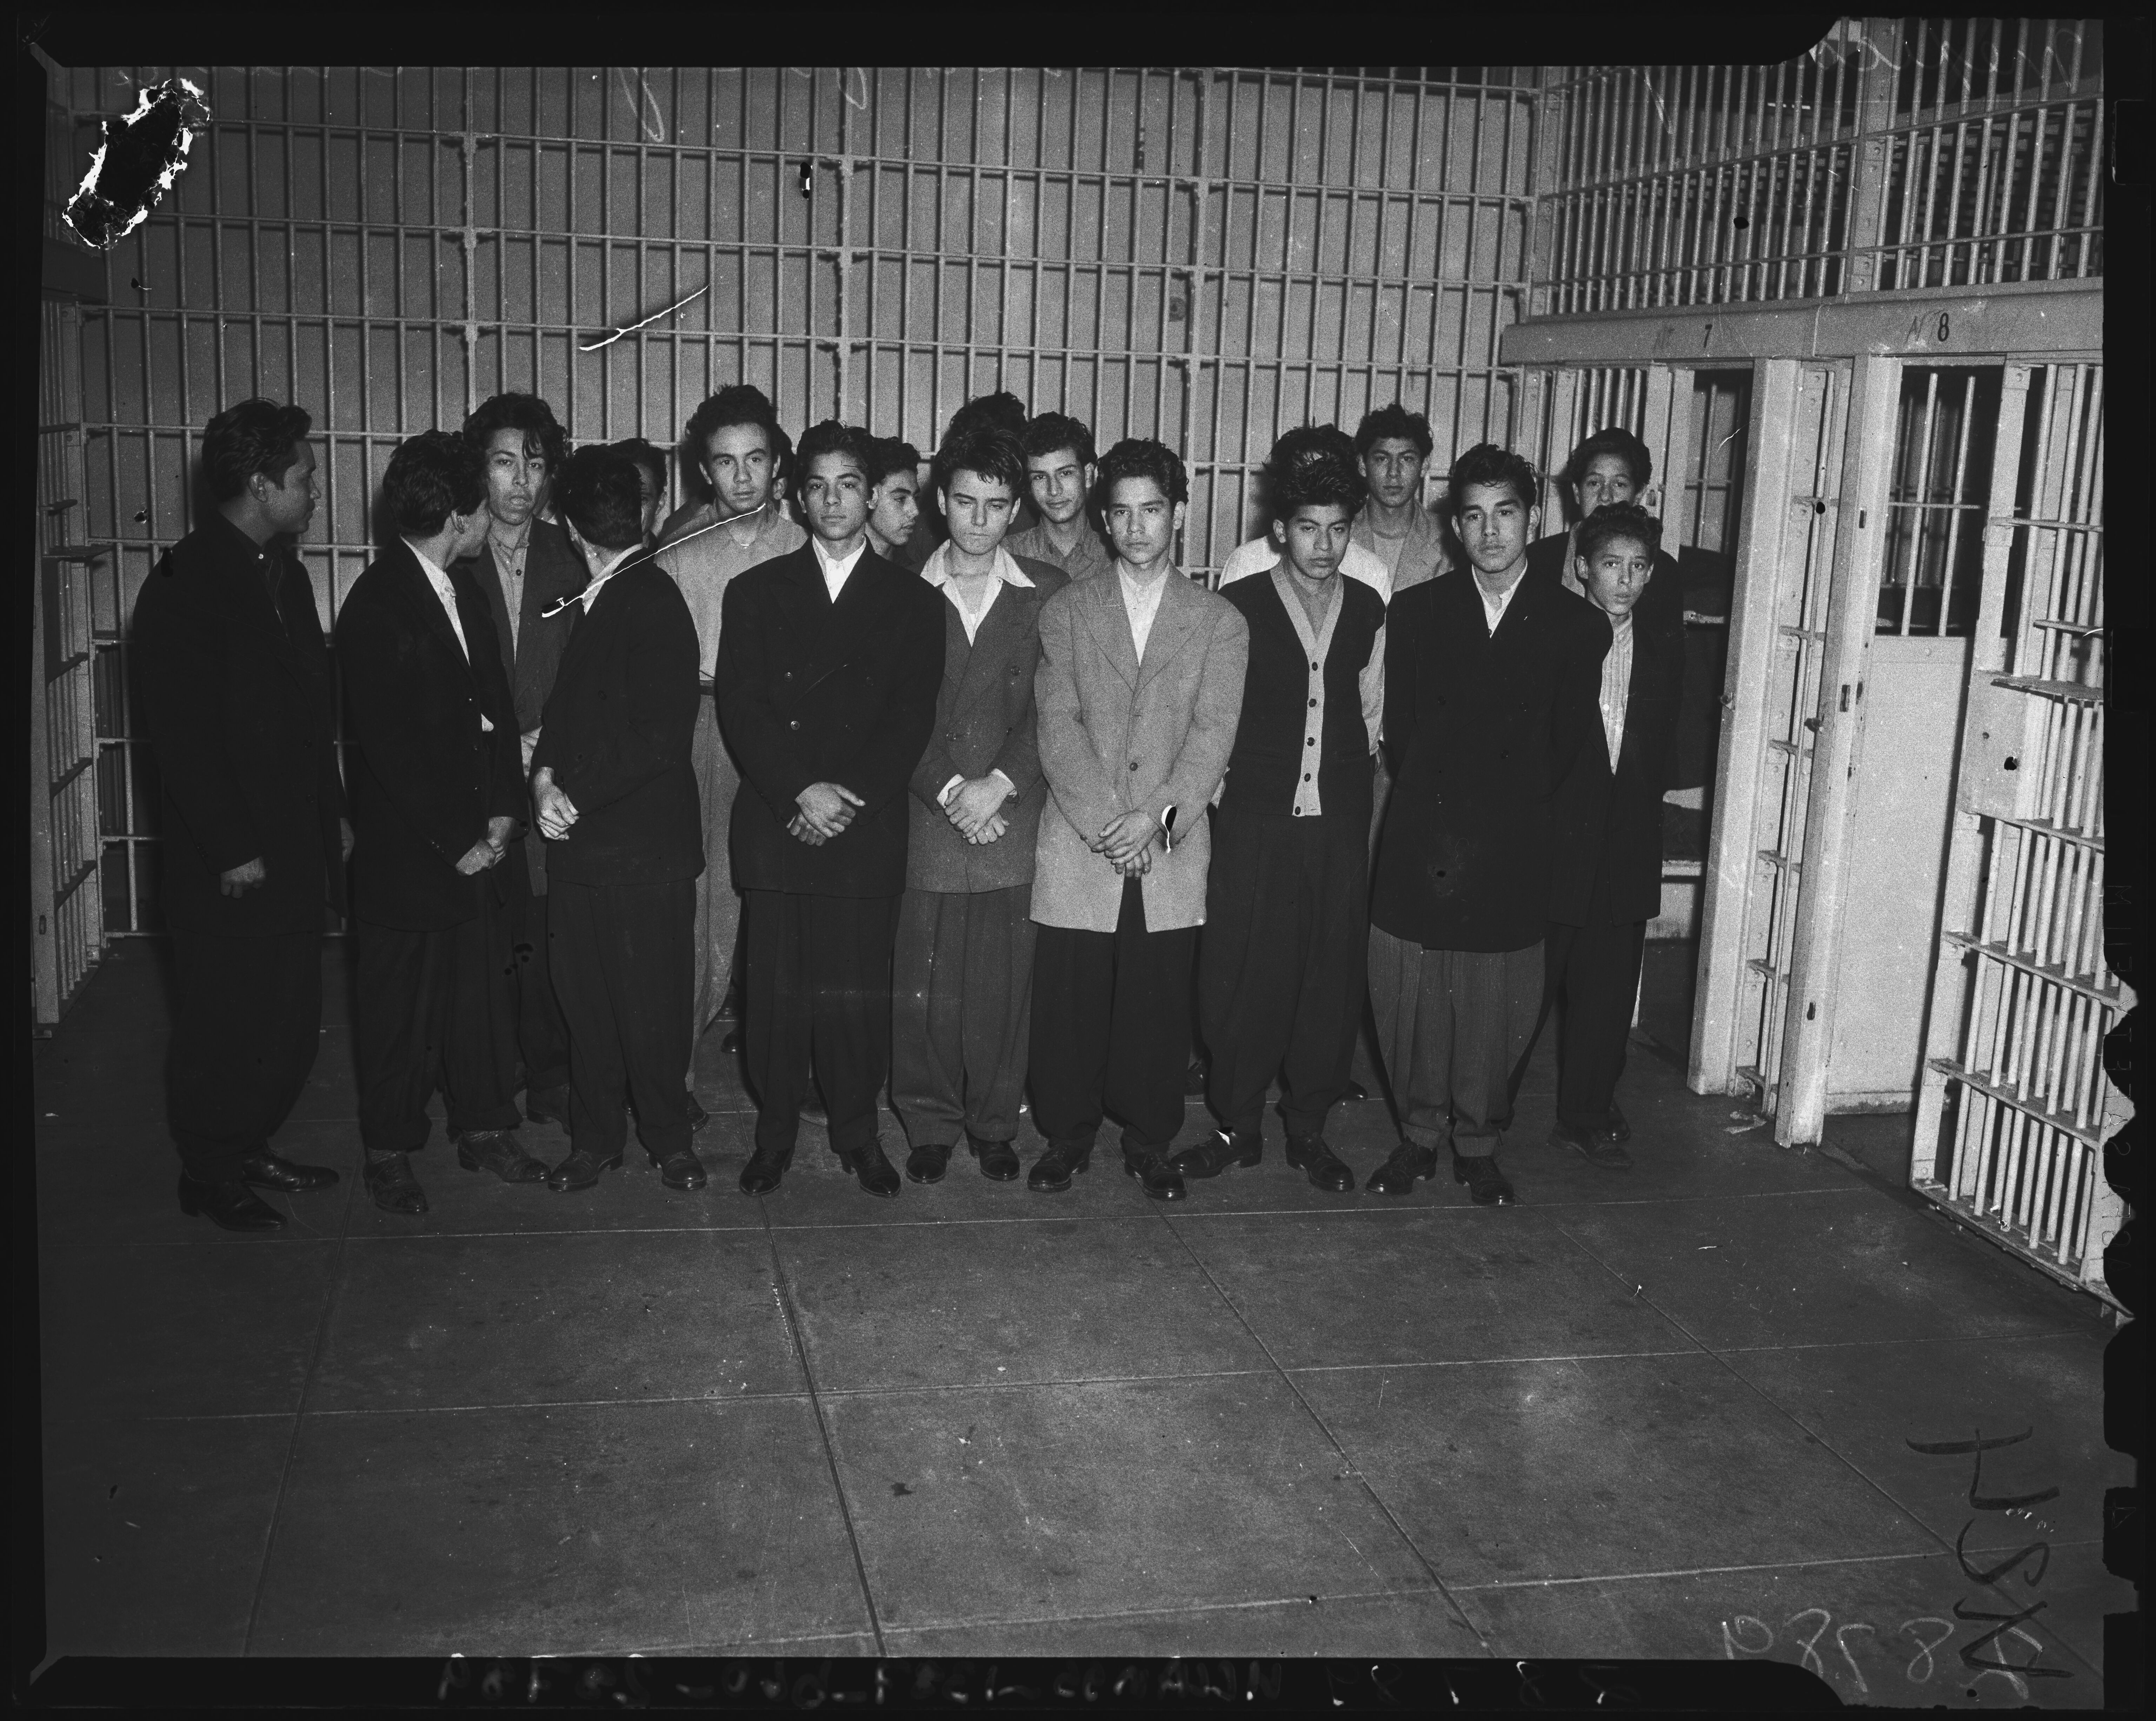 A group of about twenty teen boys being held in a cell